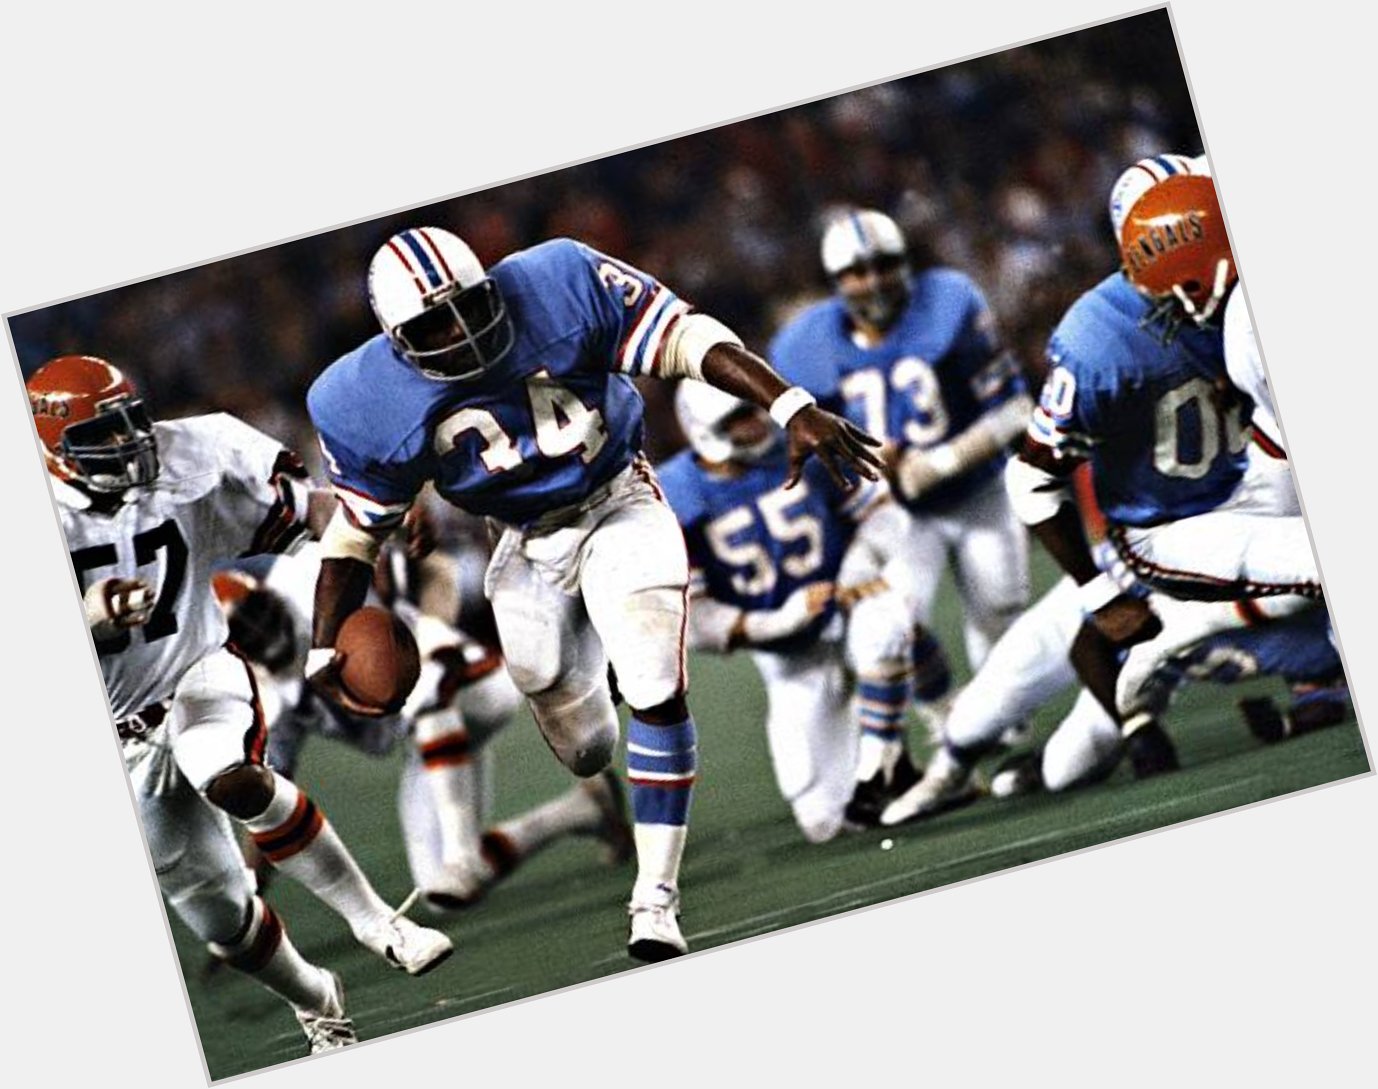 Happy Birthday to my favorite running back of my youth, the Tyler Rose, Earl Campbell! 